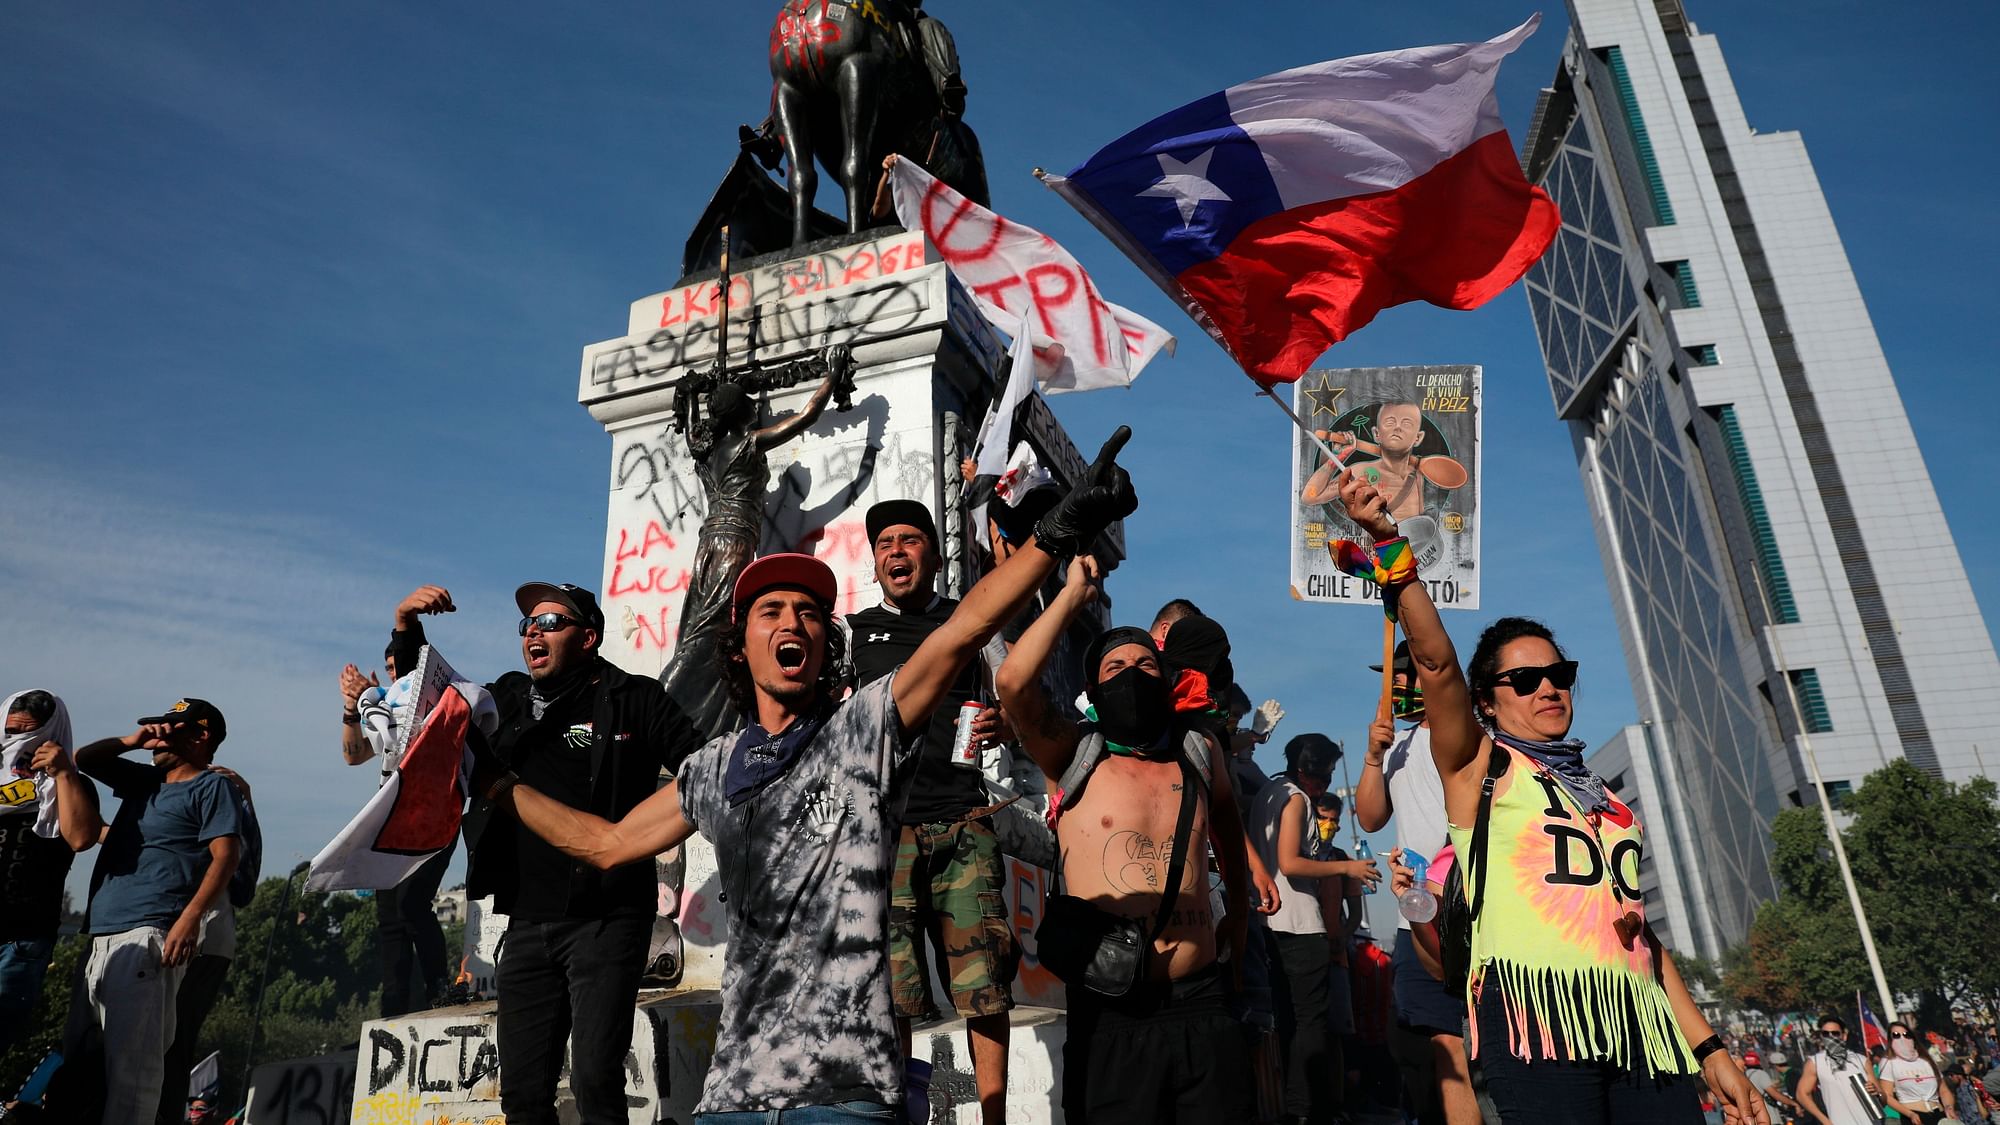 The decision to call off the Asia-Pacific Economic Cooperation and U.N. global climate gatherings, planned for November and December, respectively, dealt a major blow to Chile’s image as a regional oasis of stability and economic development.